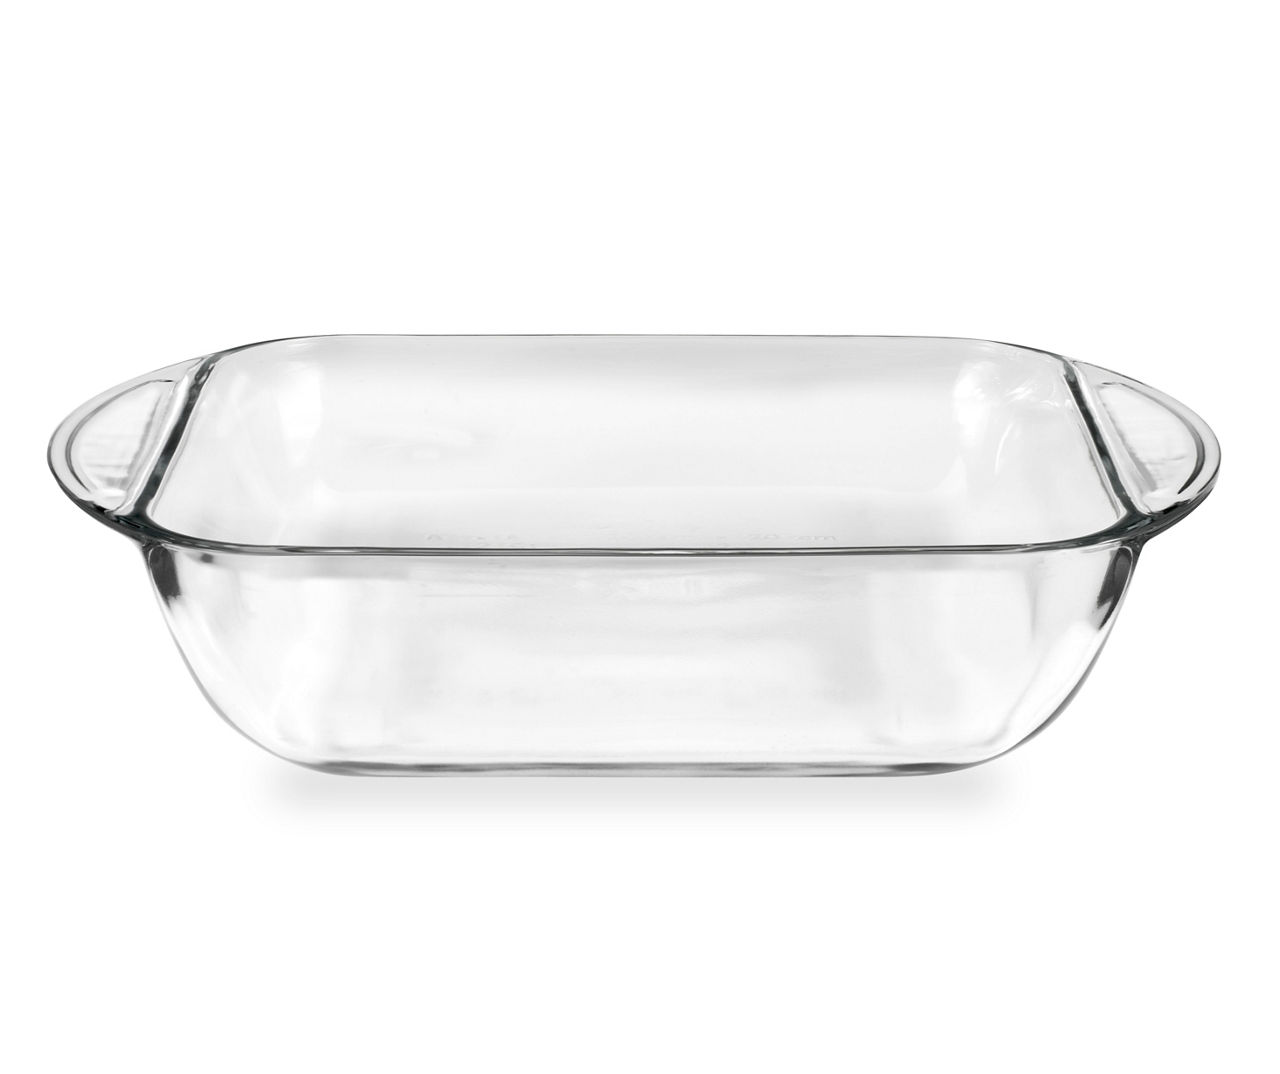 PYREX GLASS SQUARE DISH w/lid 8x8 inch - household items - by